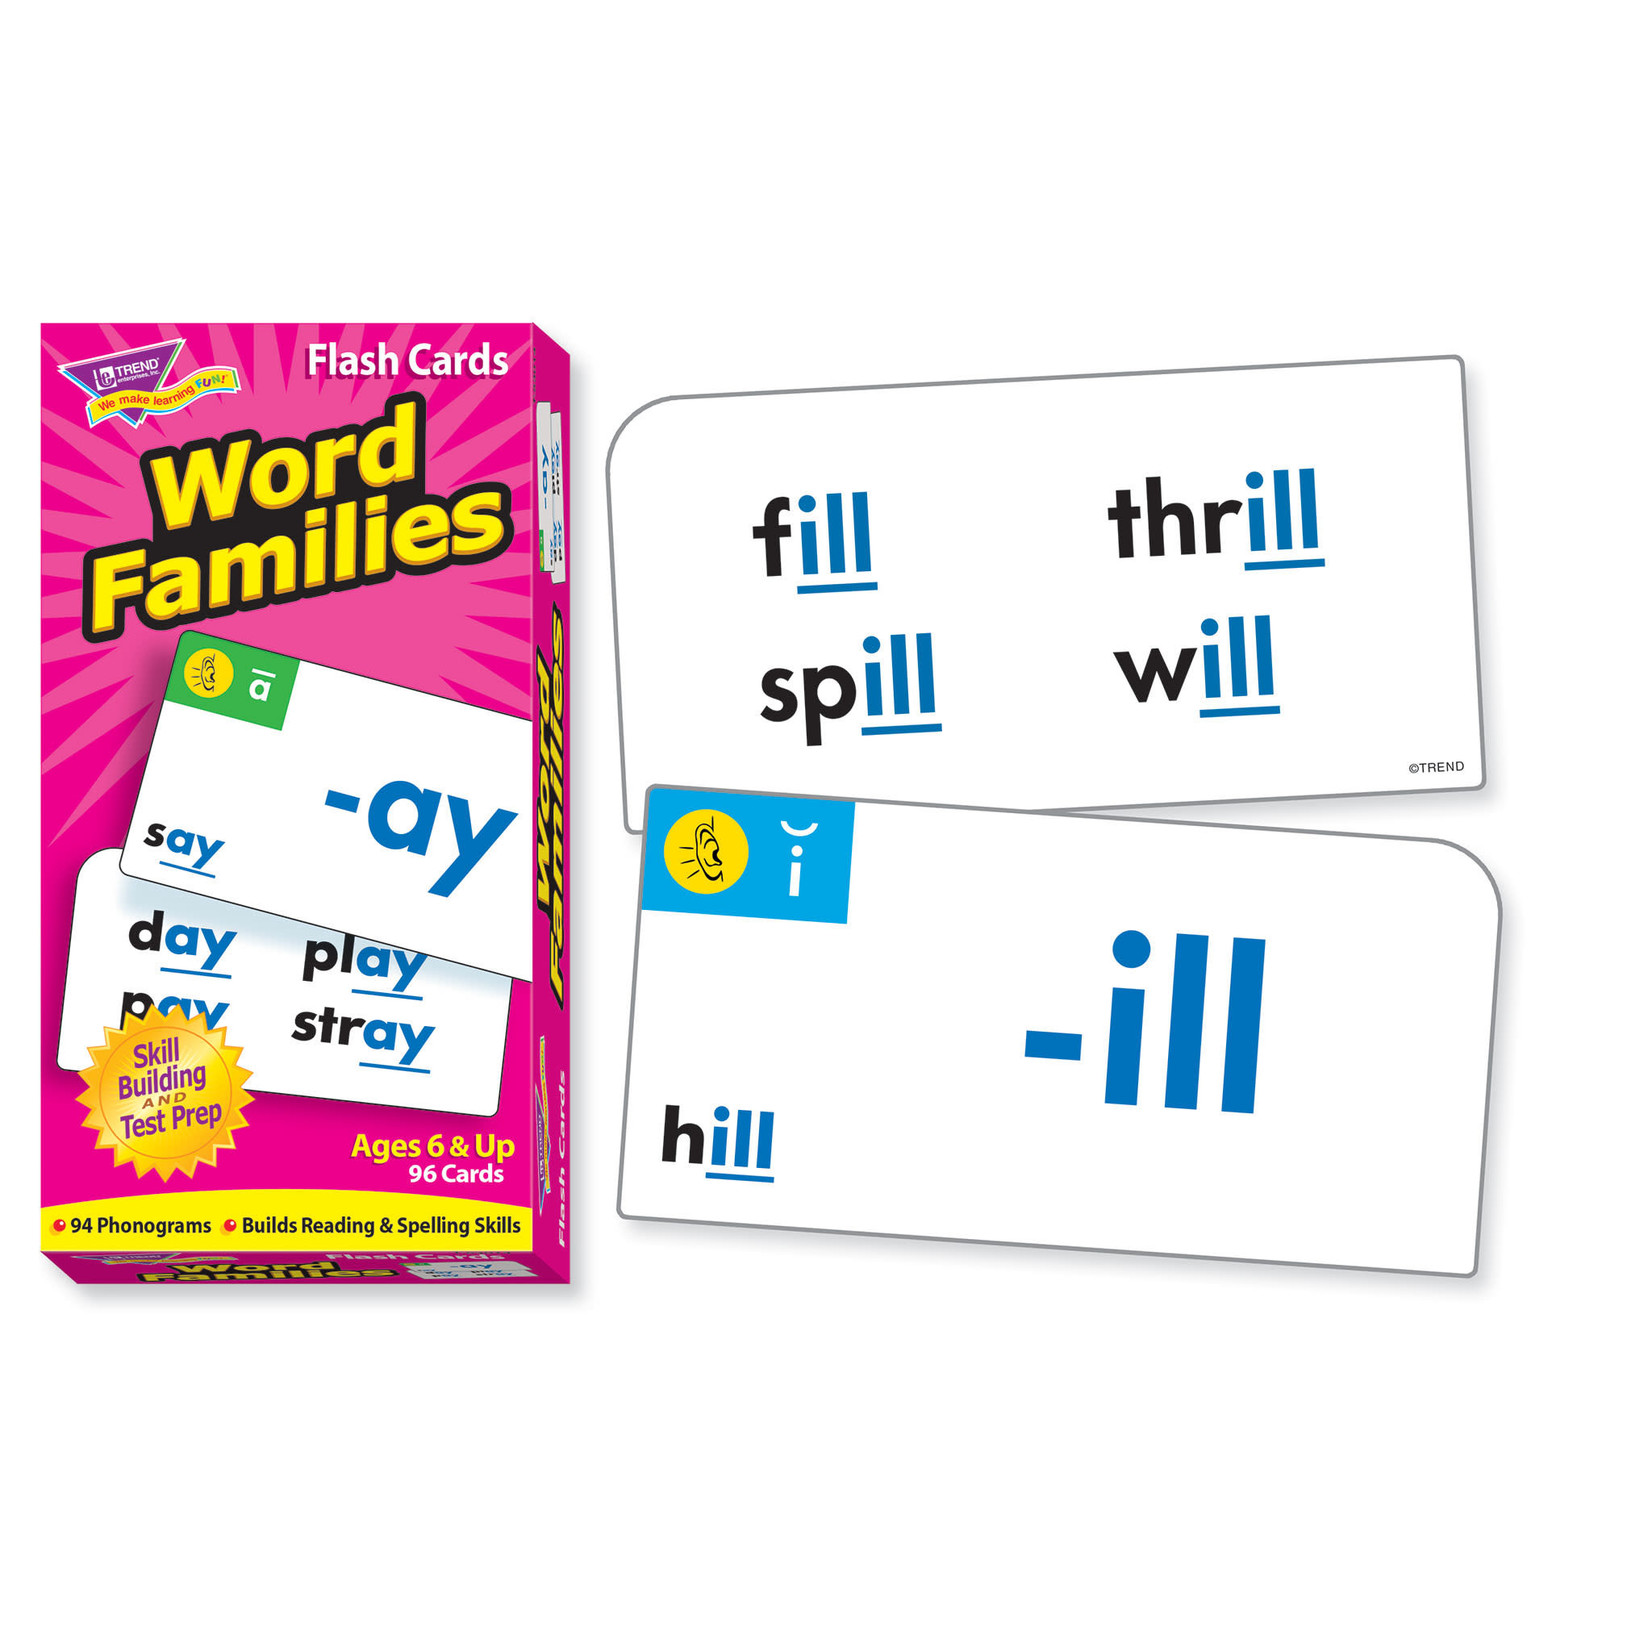 TREND Word Families Cards